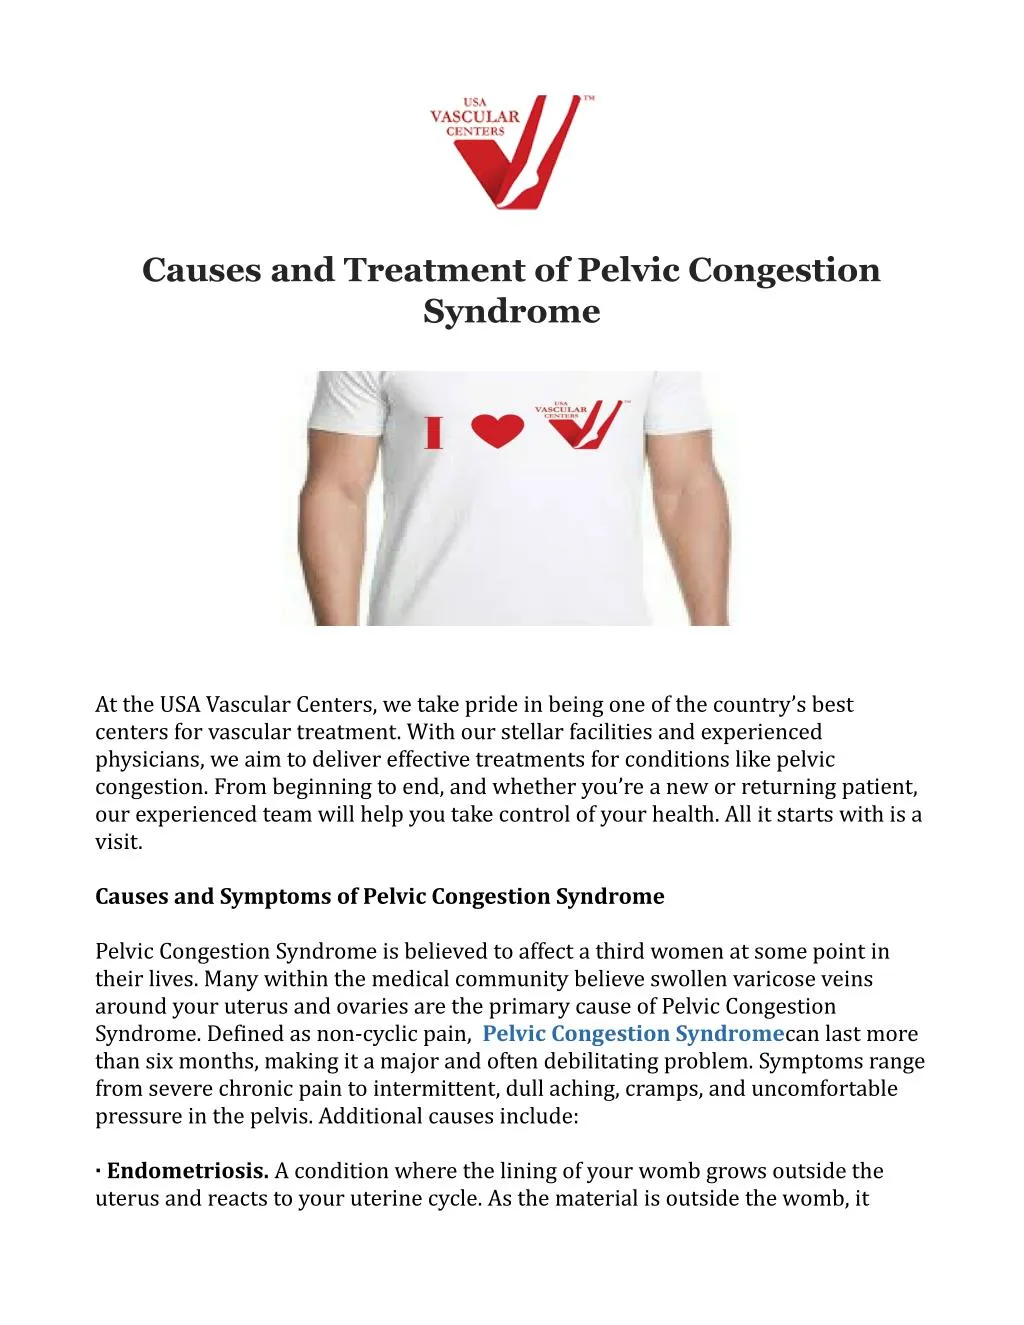 Pelvic Congestion Syndrome: Causes, Symptoms, and Treatment